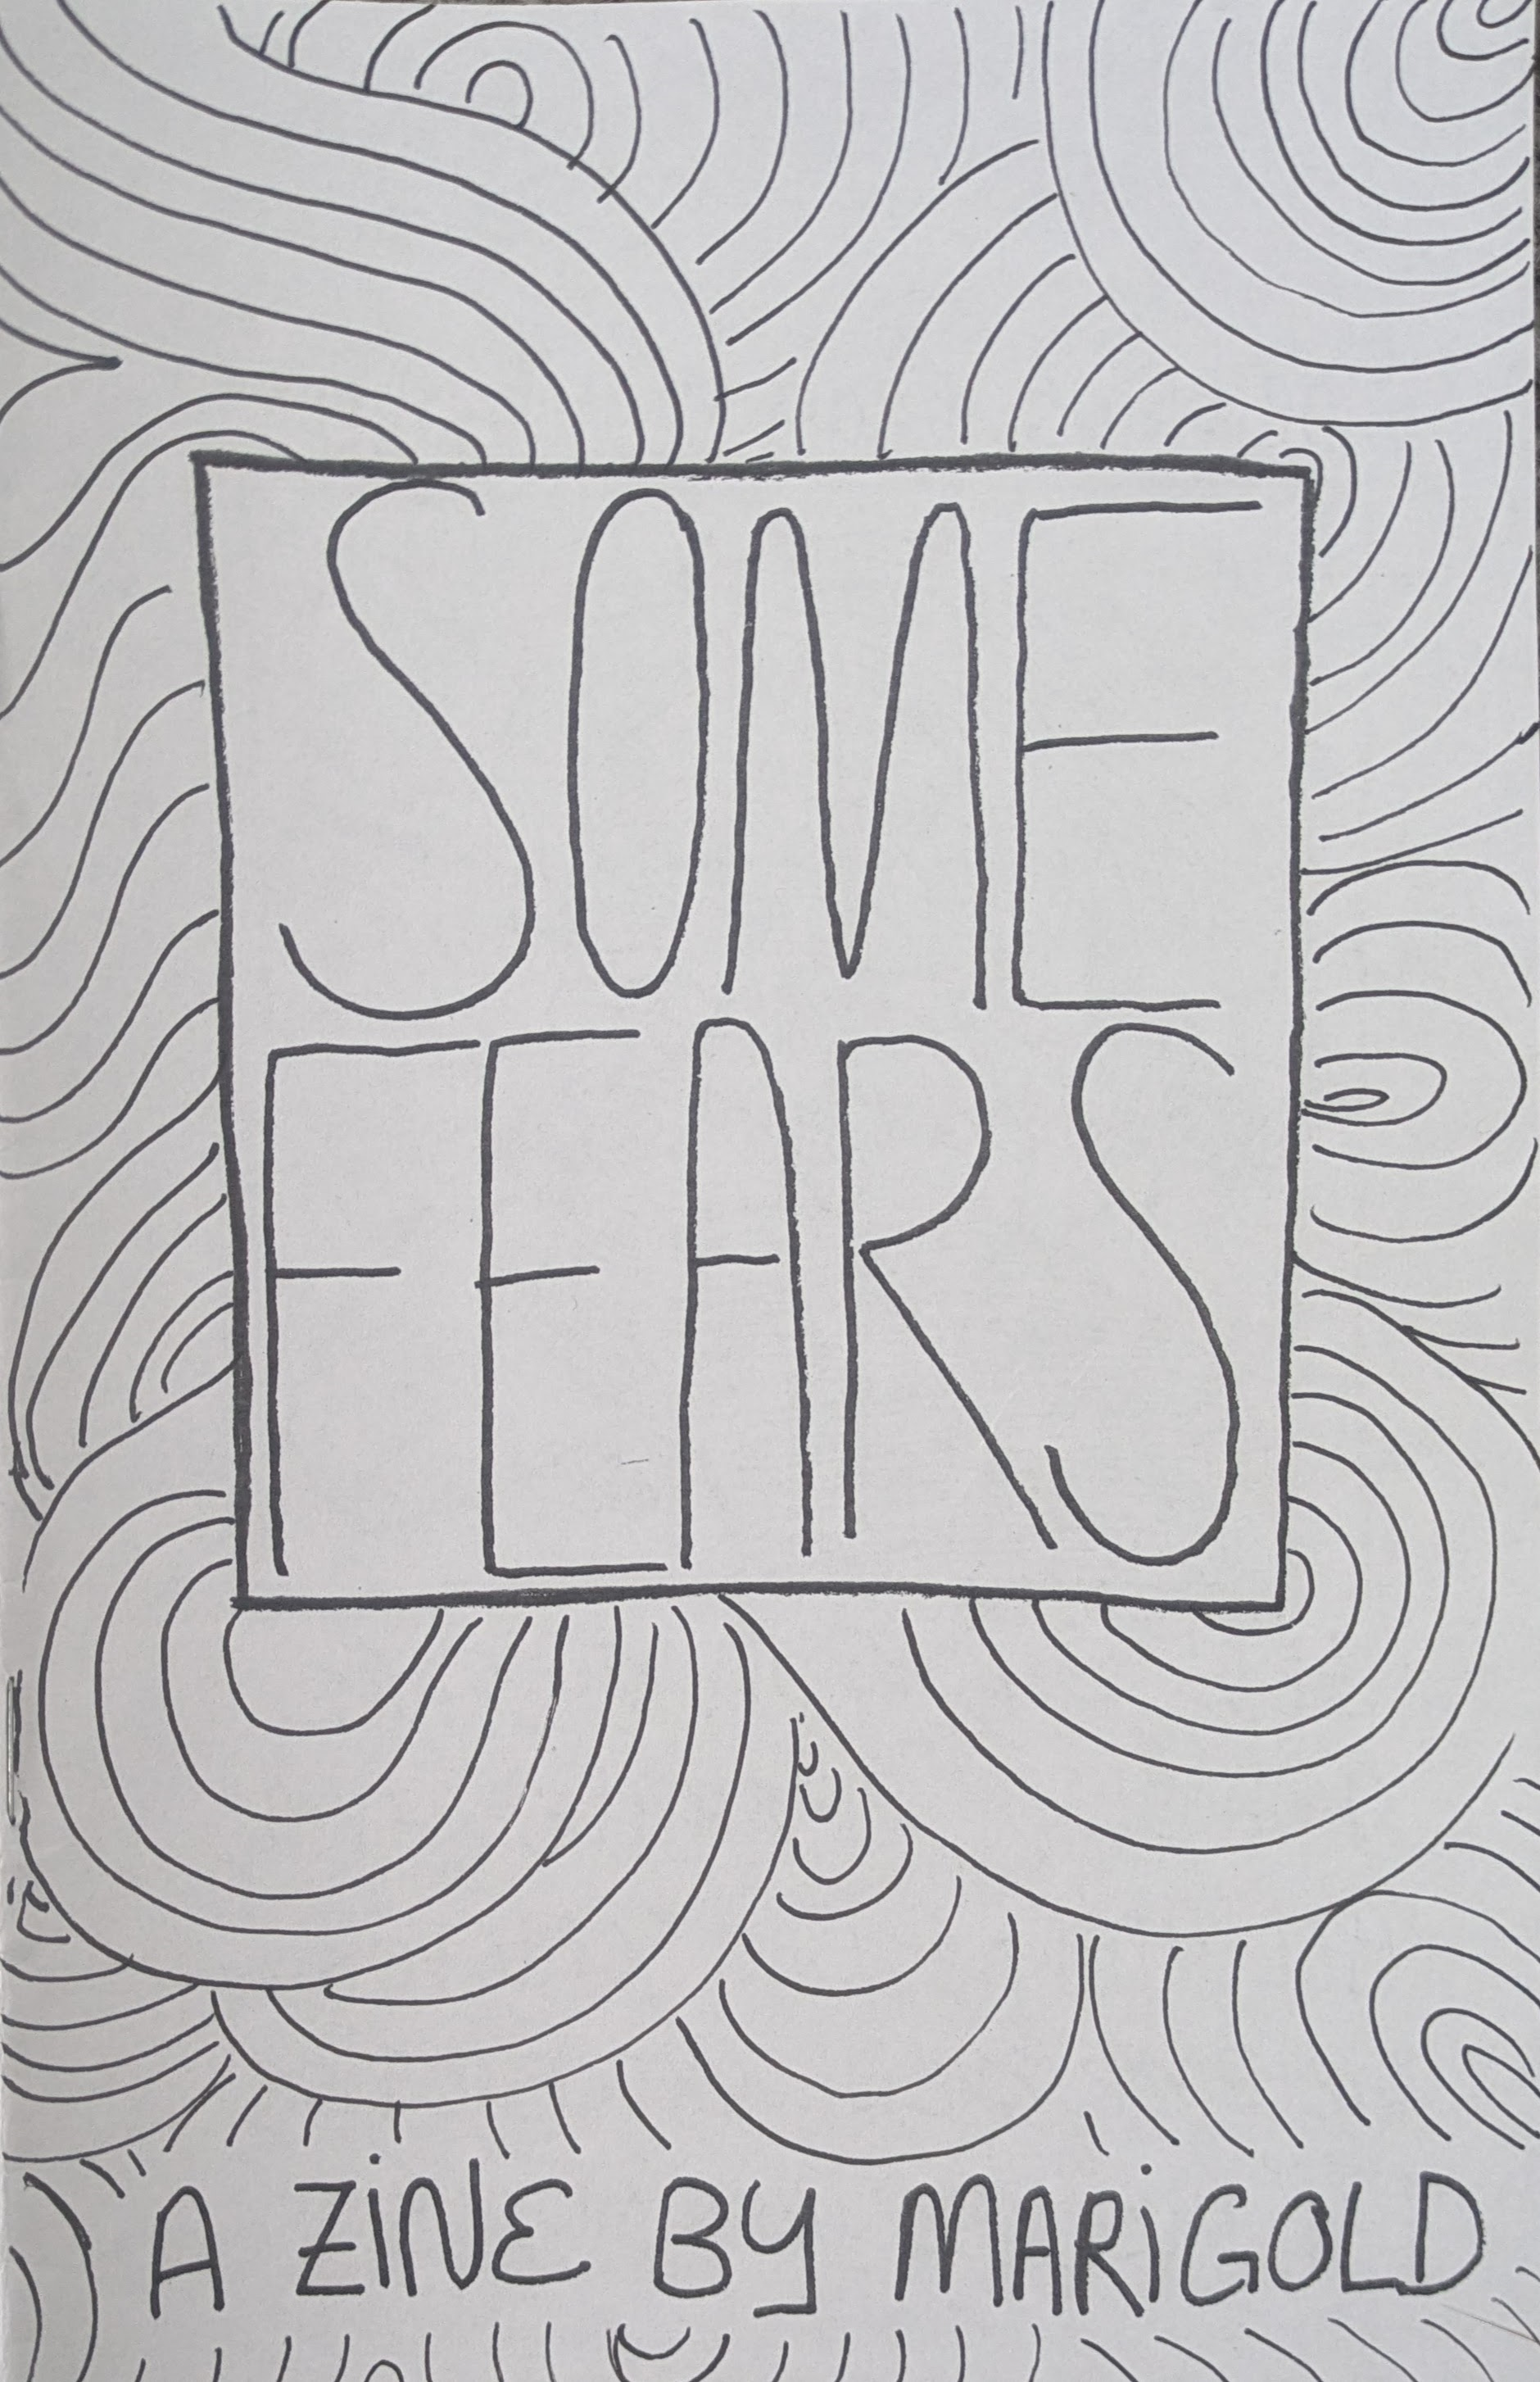 The cover of the zine “Some Fears.” The hand-lettered words sit in the middle of an illustration of spirals.